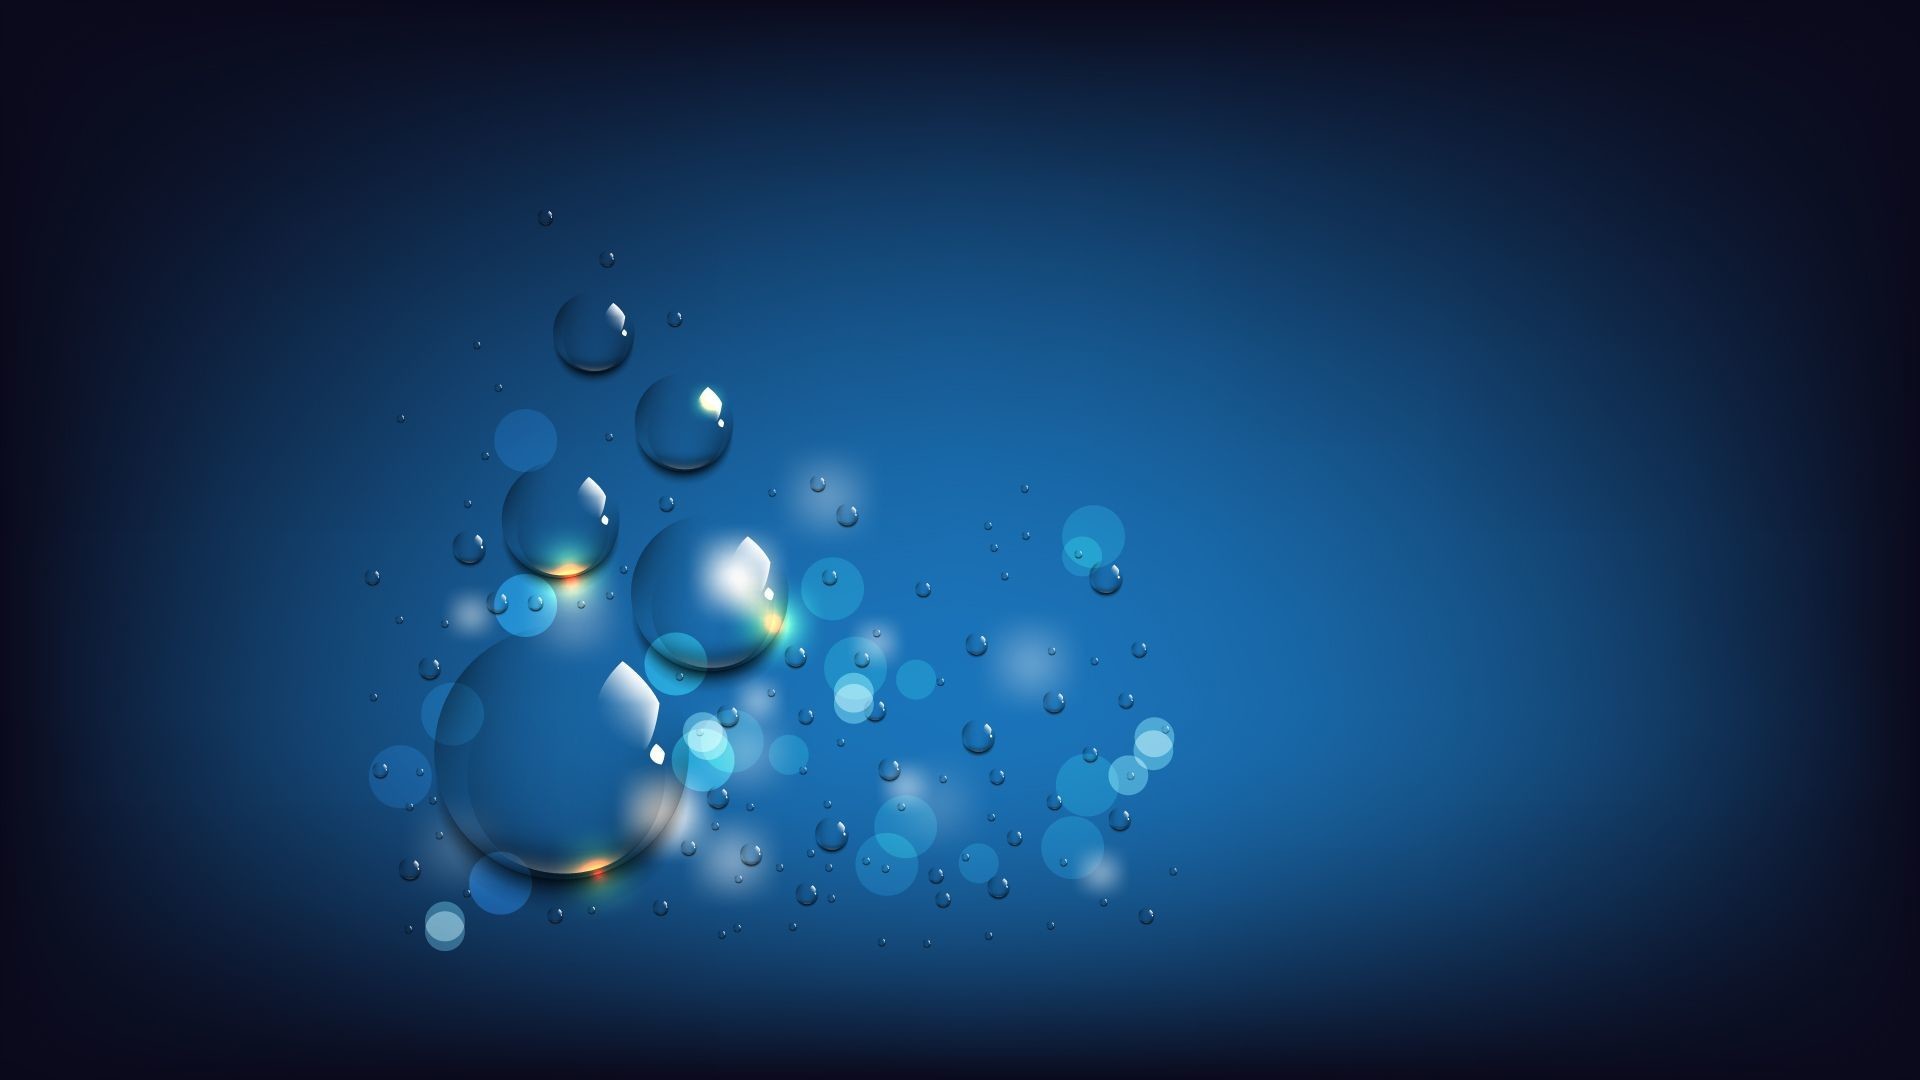 1920x1080 3840x2160 Blue Bubble Images Wallpaper High Quality Hd For Pc Green Bubbles